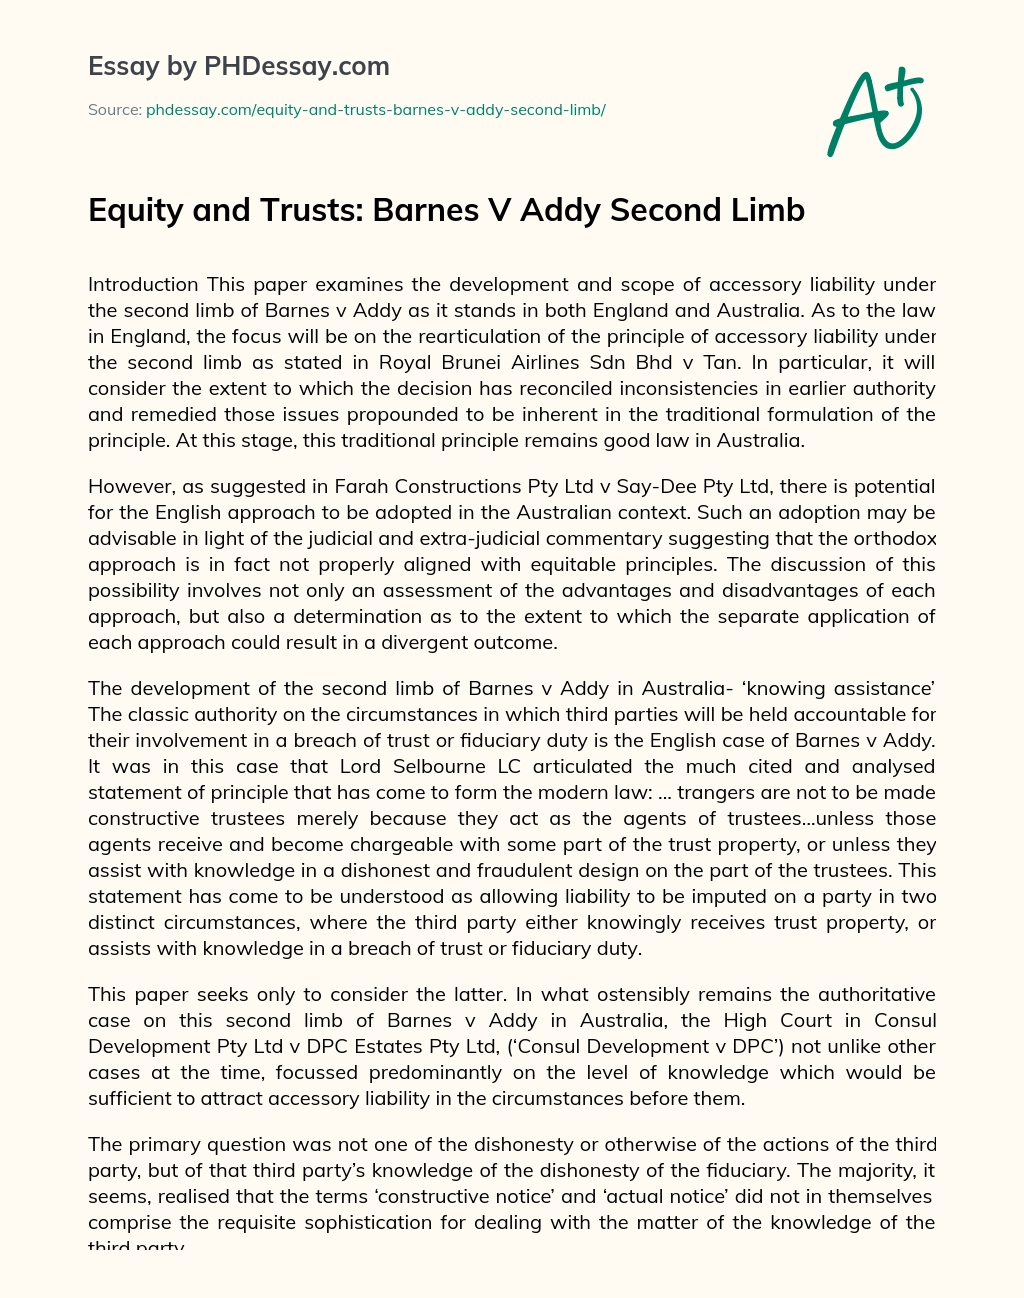 Equity and Trusts: Barnes V Addy Second Limb essay